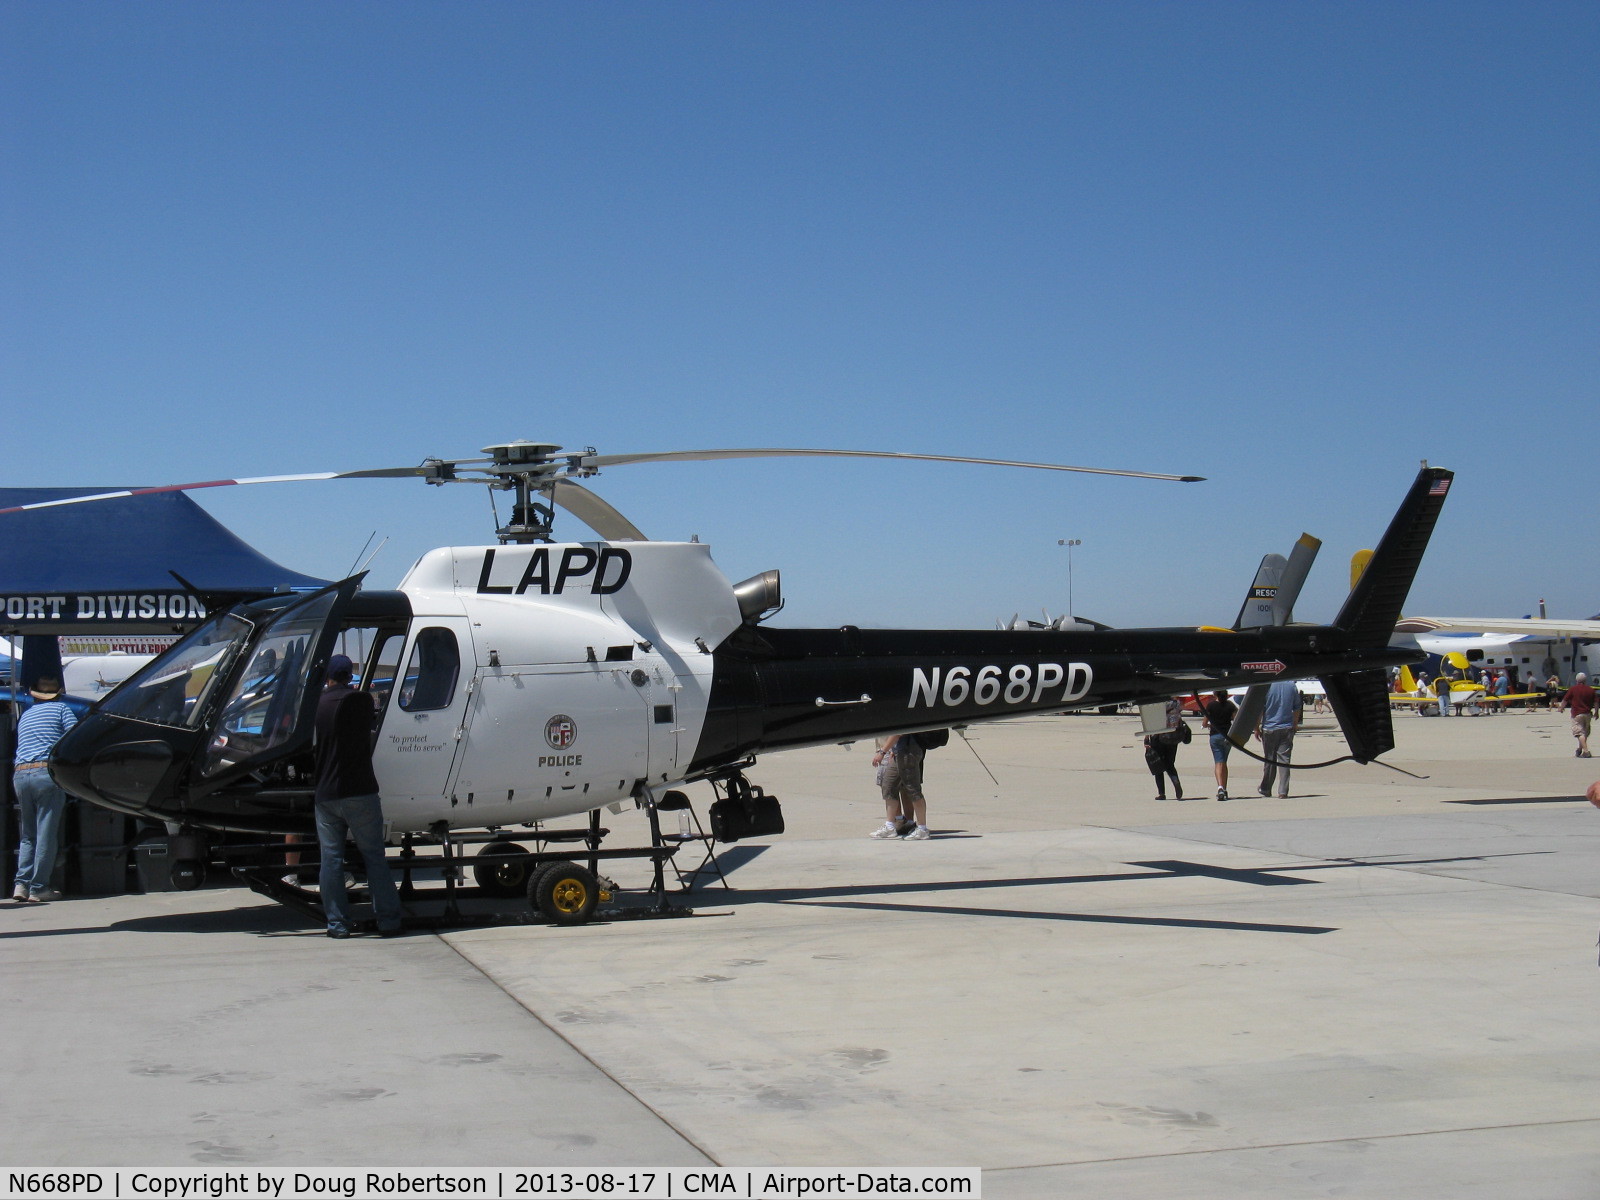 N668PD, 2009 Aerospatiale AS-350B-2 Ecureuil C/N 4654, American Eurocopter LLC AS350B2 SuperStar of Los Angeles PD, one Turbomeca Arriel 1D1 Turboshaft of 590 shp for takeoff, exhibited at Wings Over Camarillo Airshow